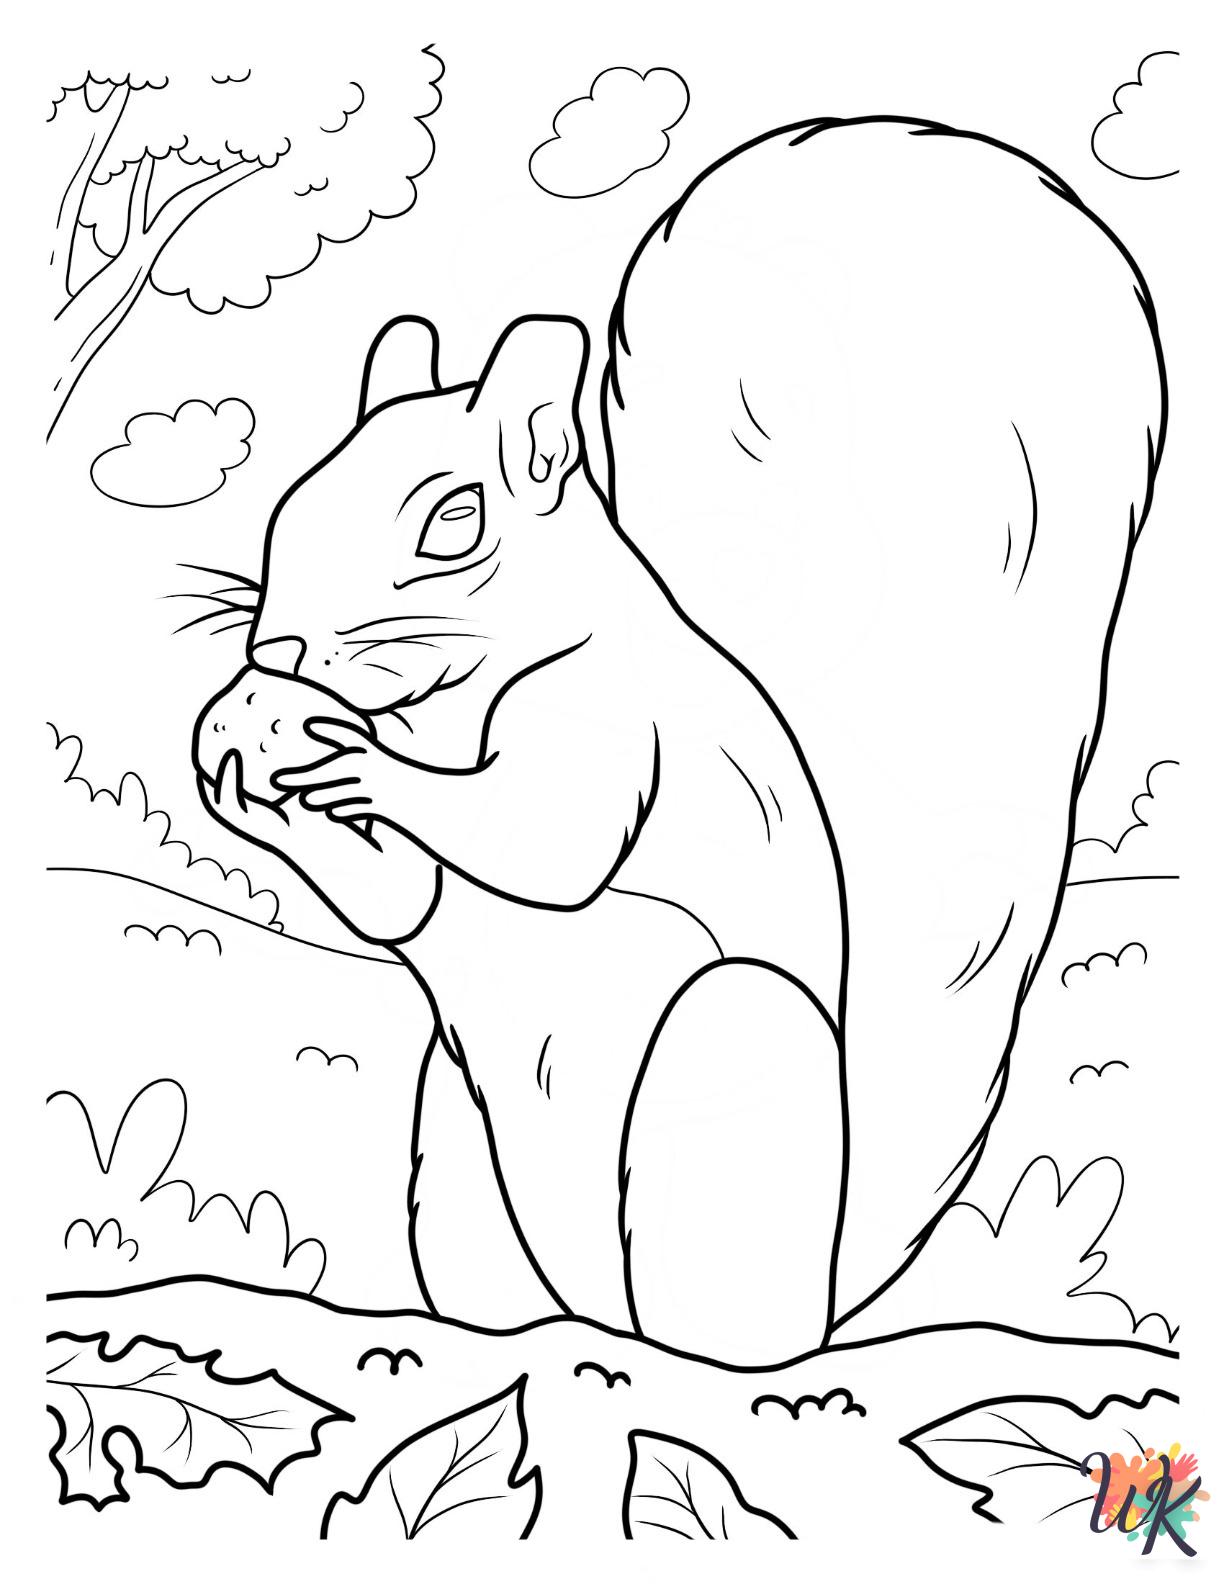 printable Squirrel coloring pages for adults